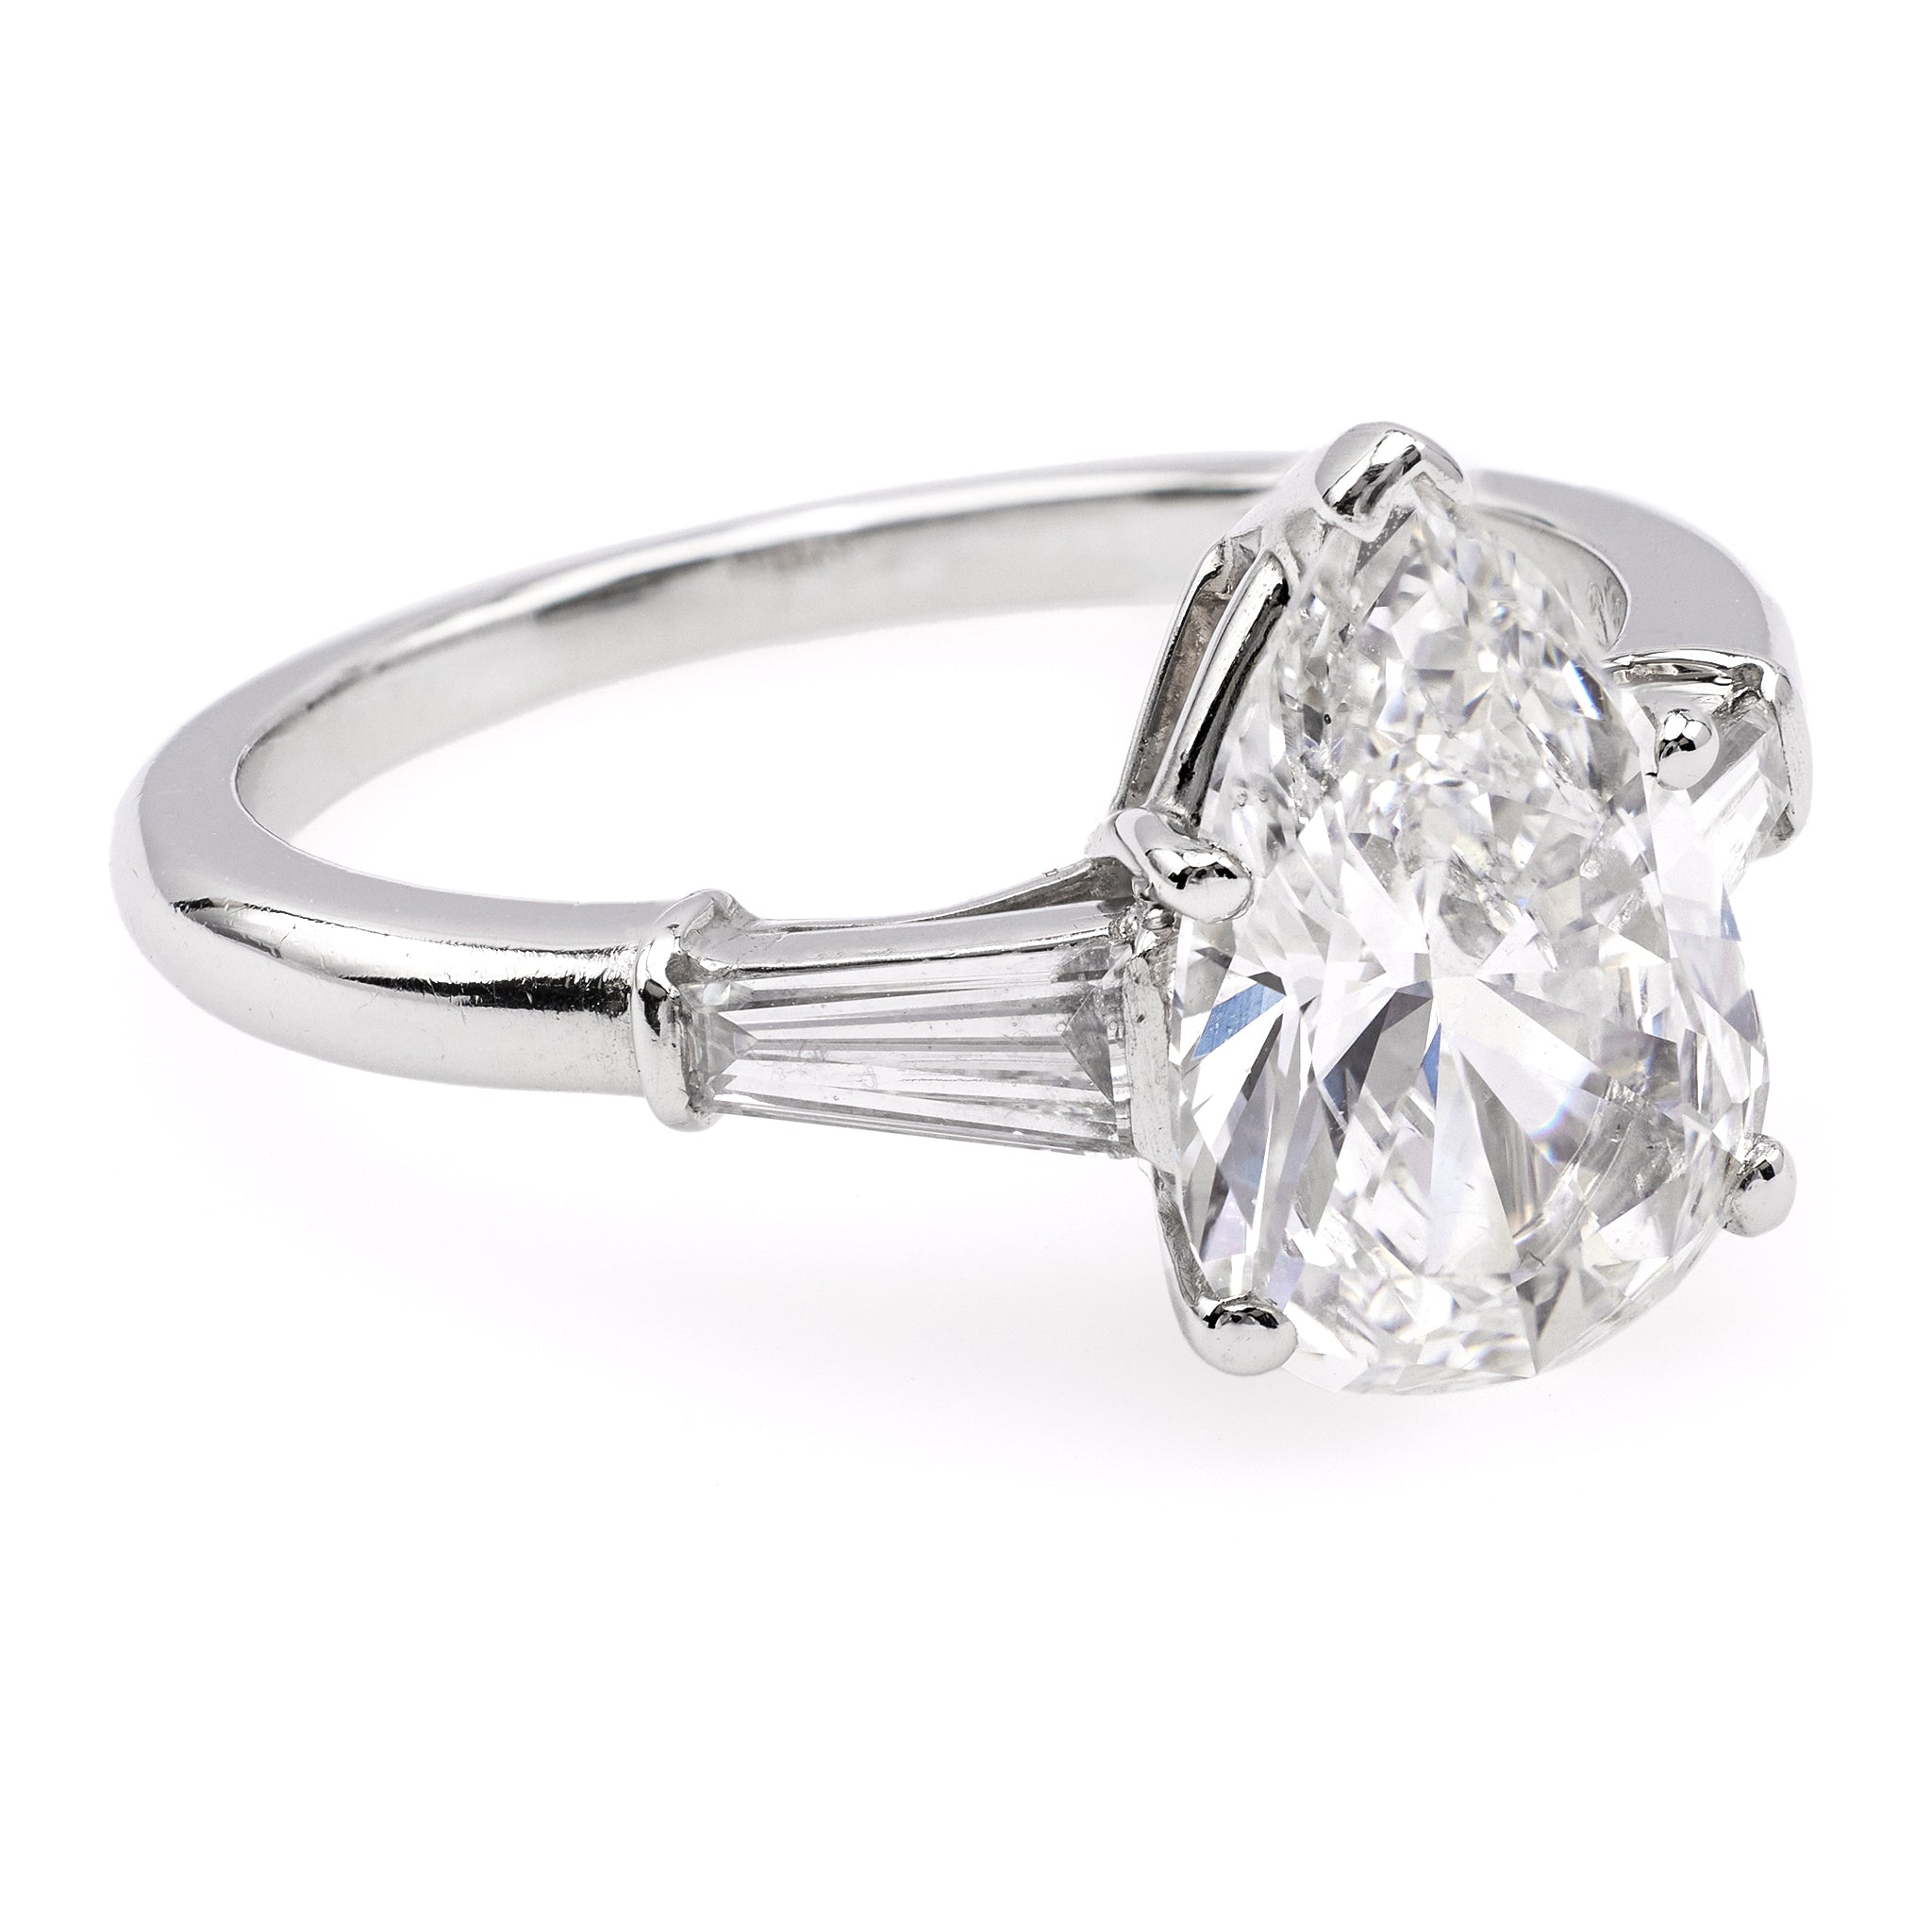 Cartier Platinum And Diamond Ring Available For Immediate Sale At Sotheby's